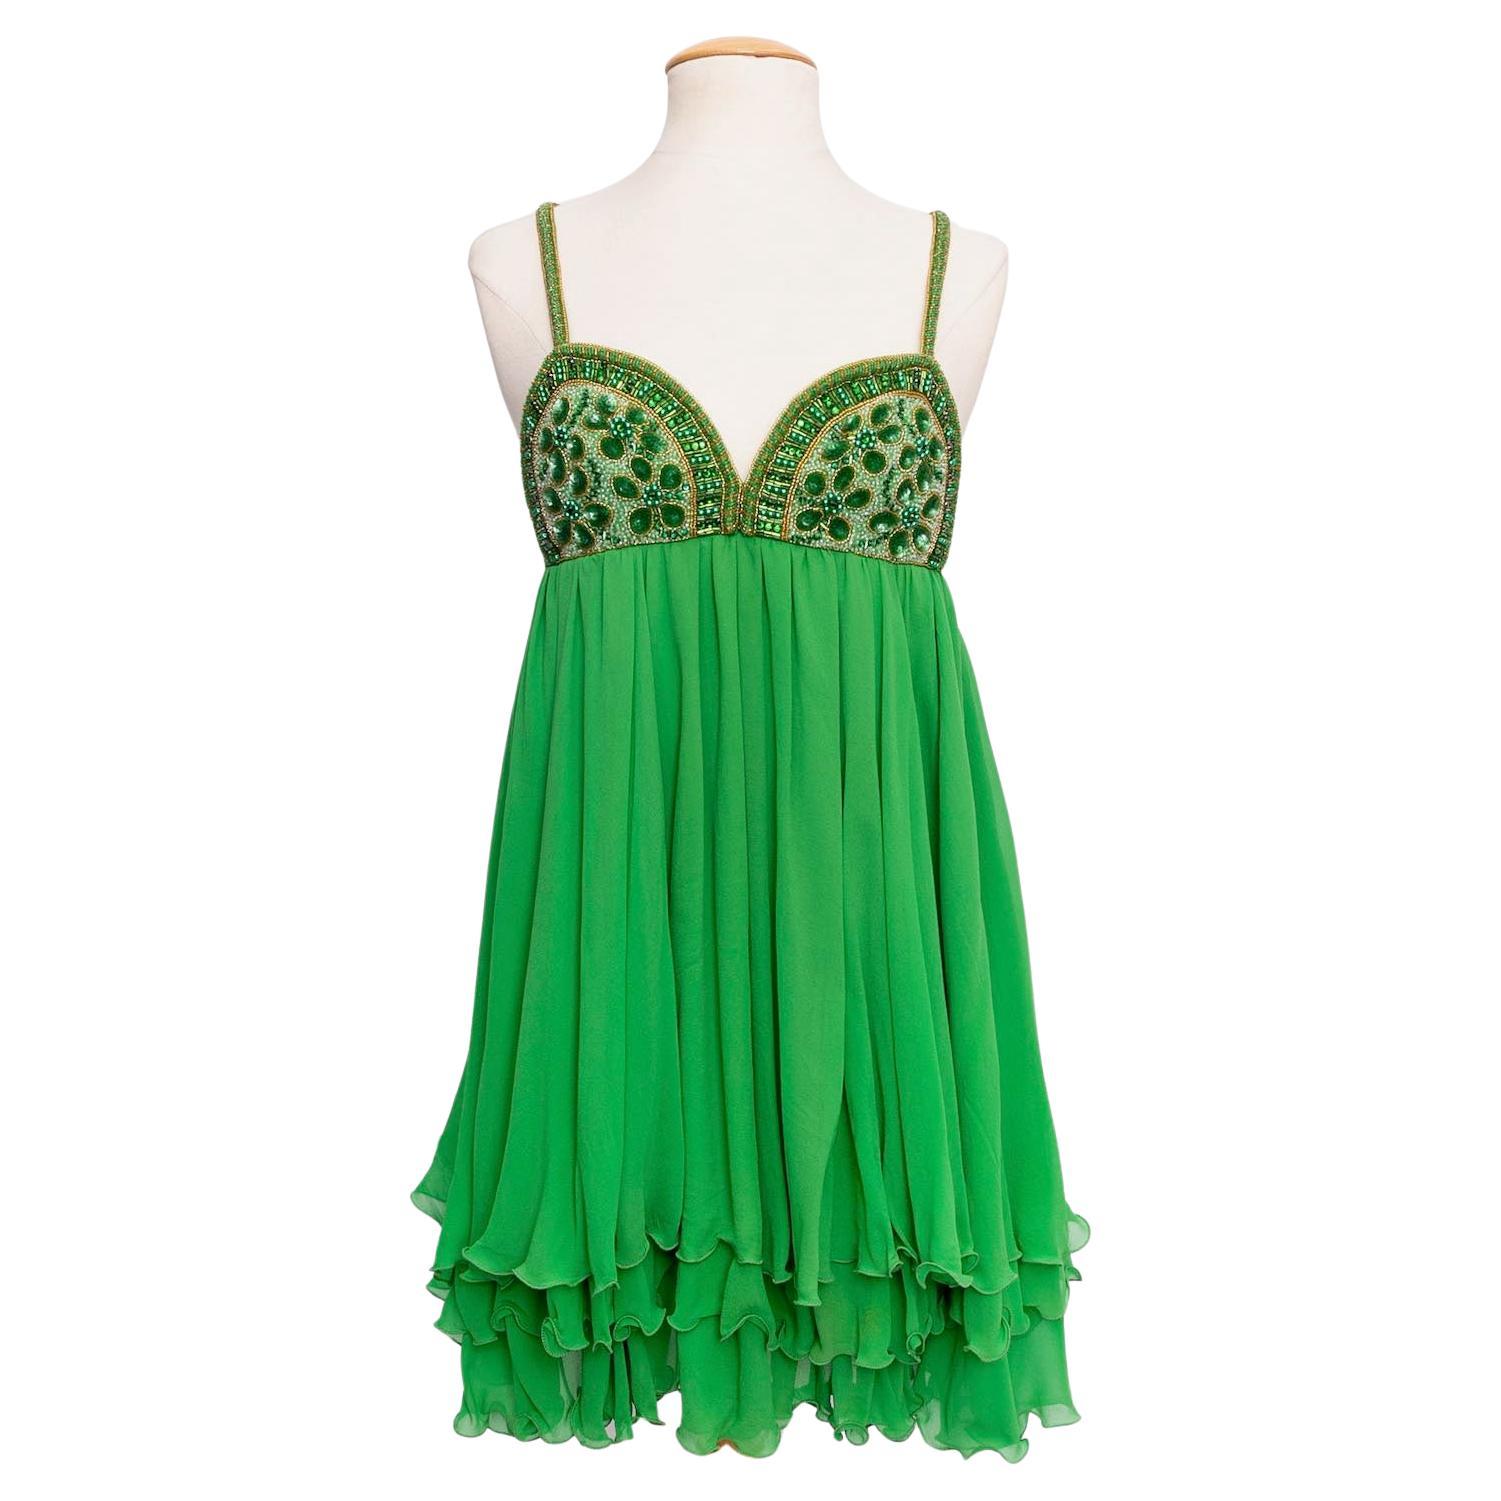 Serge Lepage Skater Dress in Silk Chiffon Embroidered with Pearly Beads For Sale